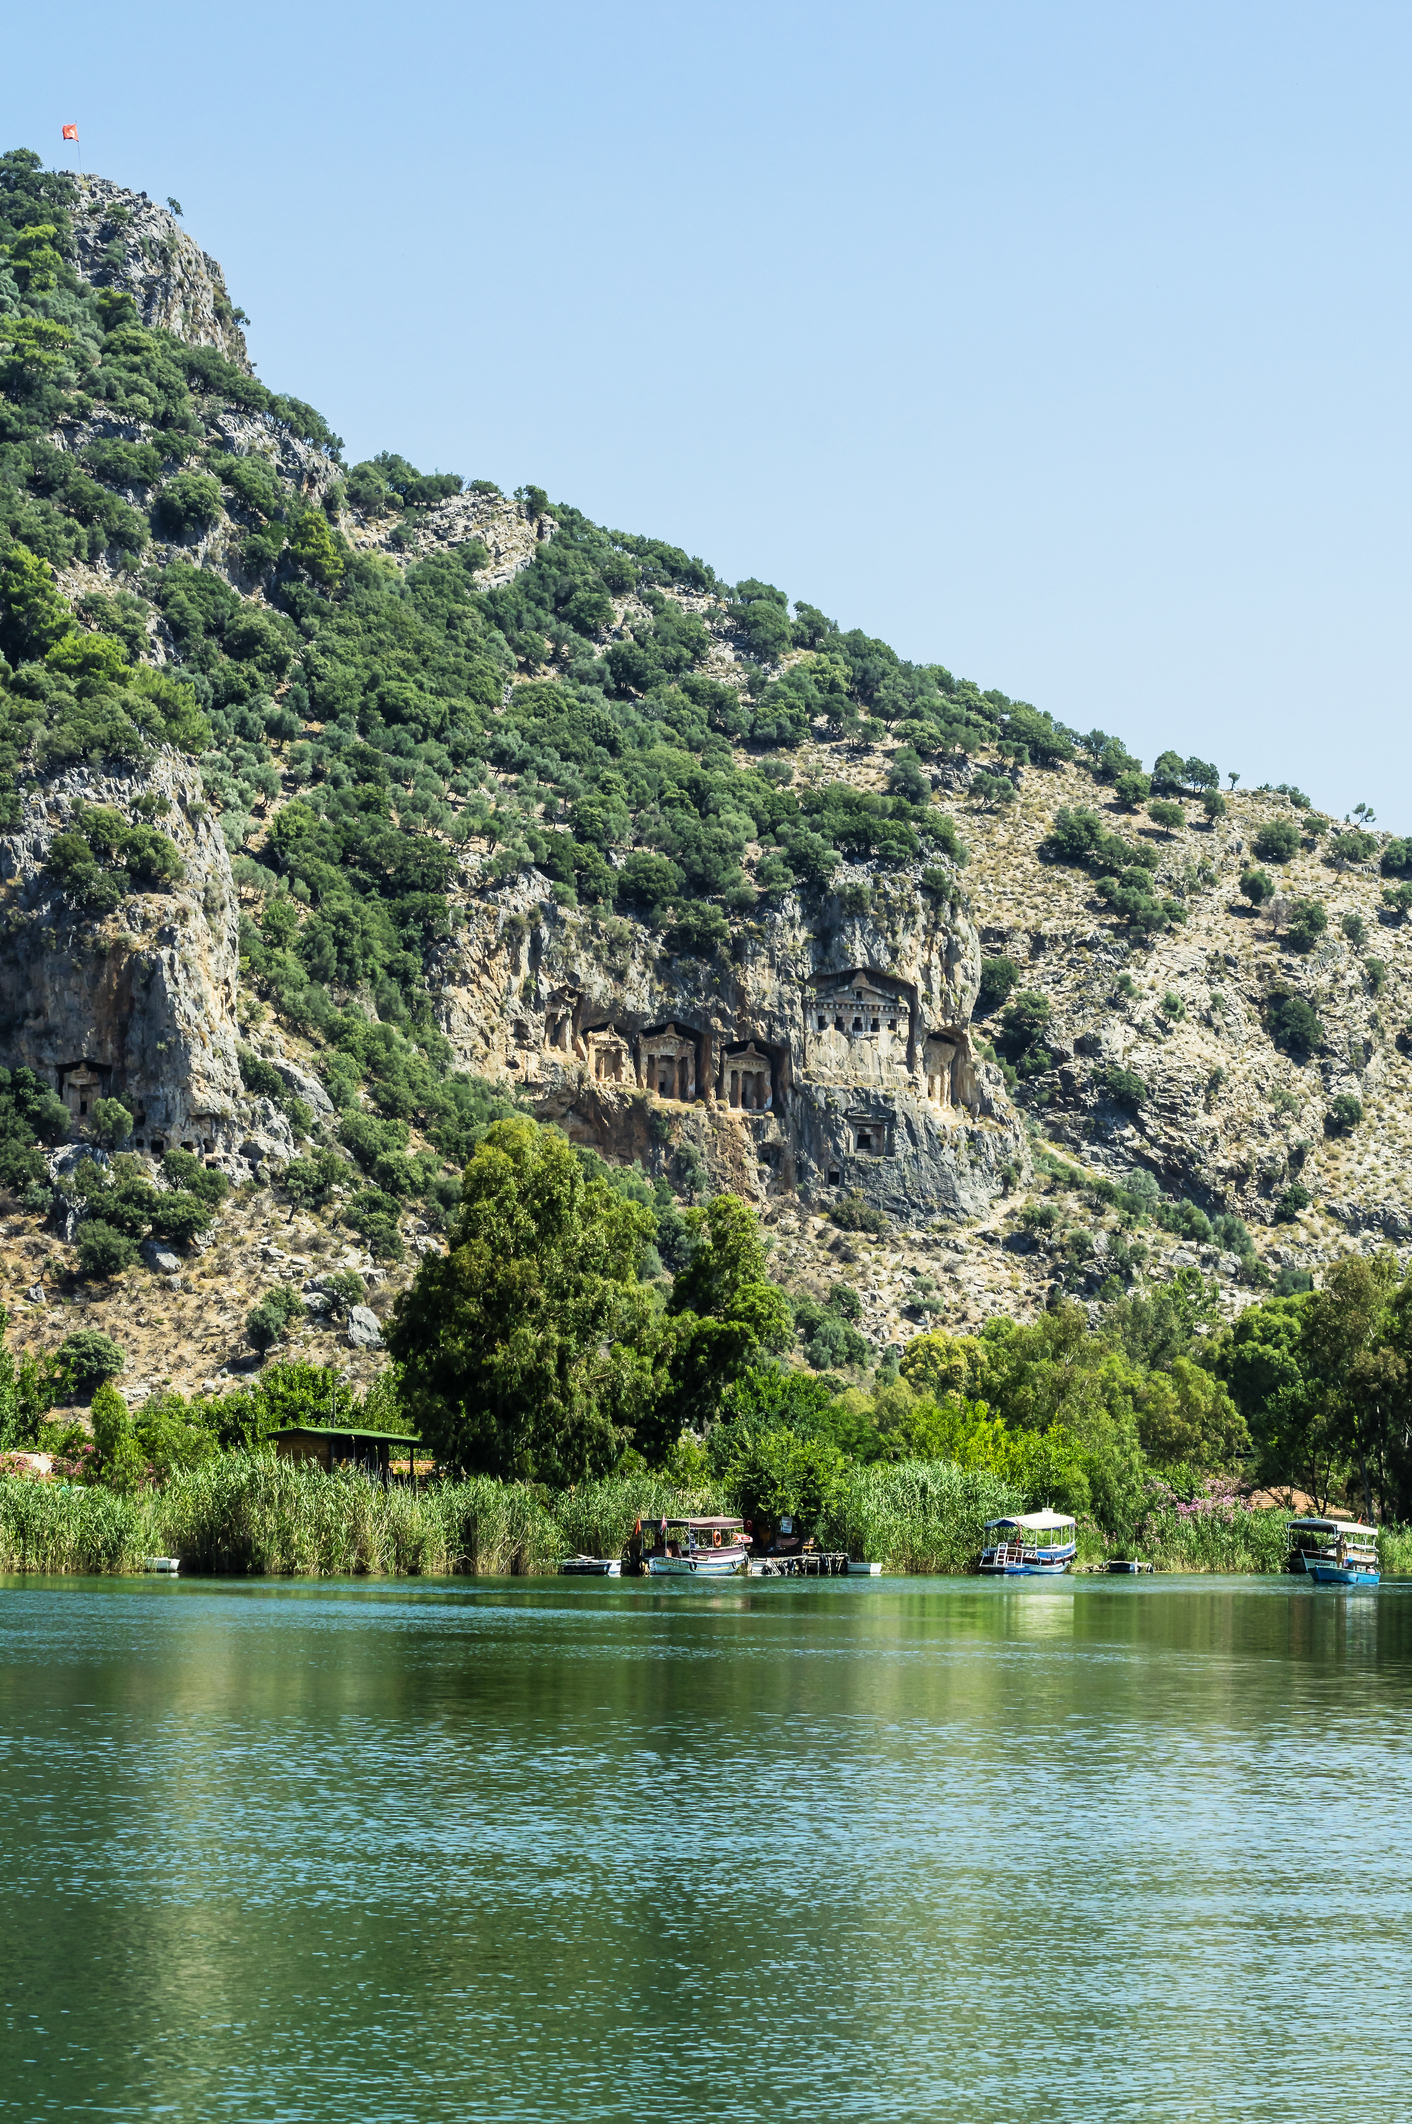 Scenic view of a calm river with boats, bordered by lush greenery and rocky cliffs with ancient carvings